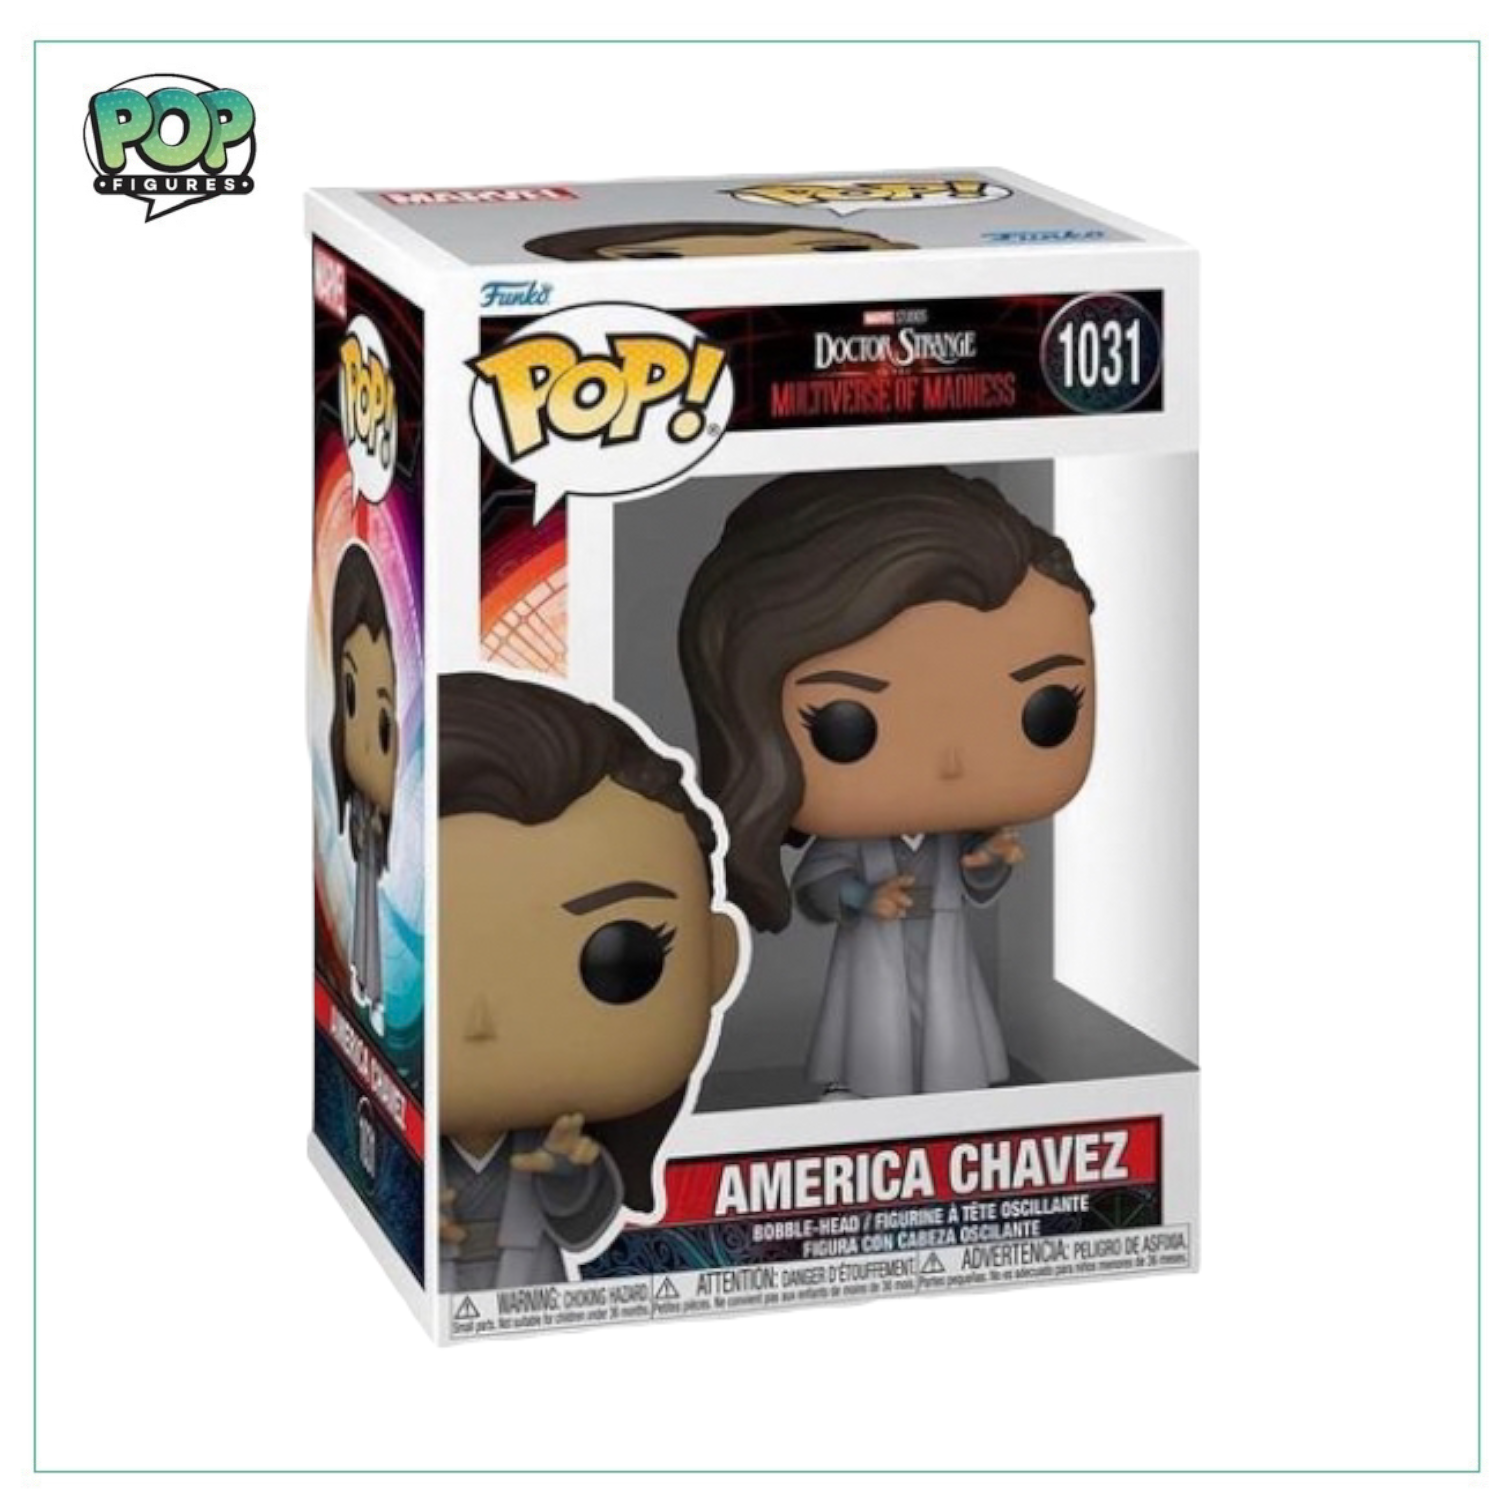 America Chavez #1031 Funko Pop! - Dr. Strange and the Multiverse of Madness